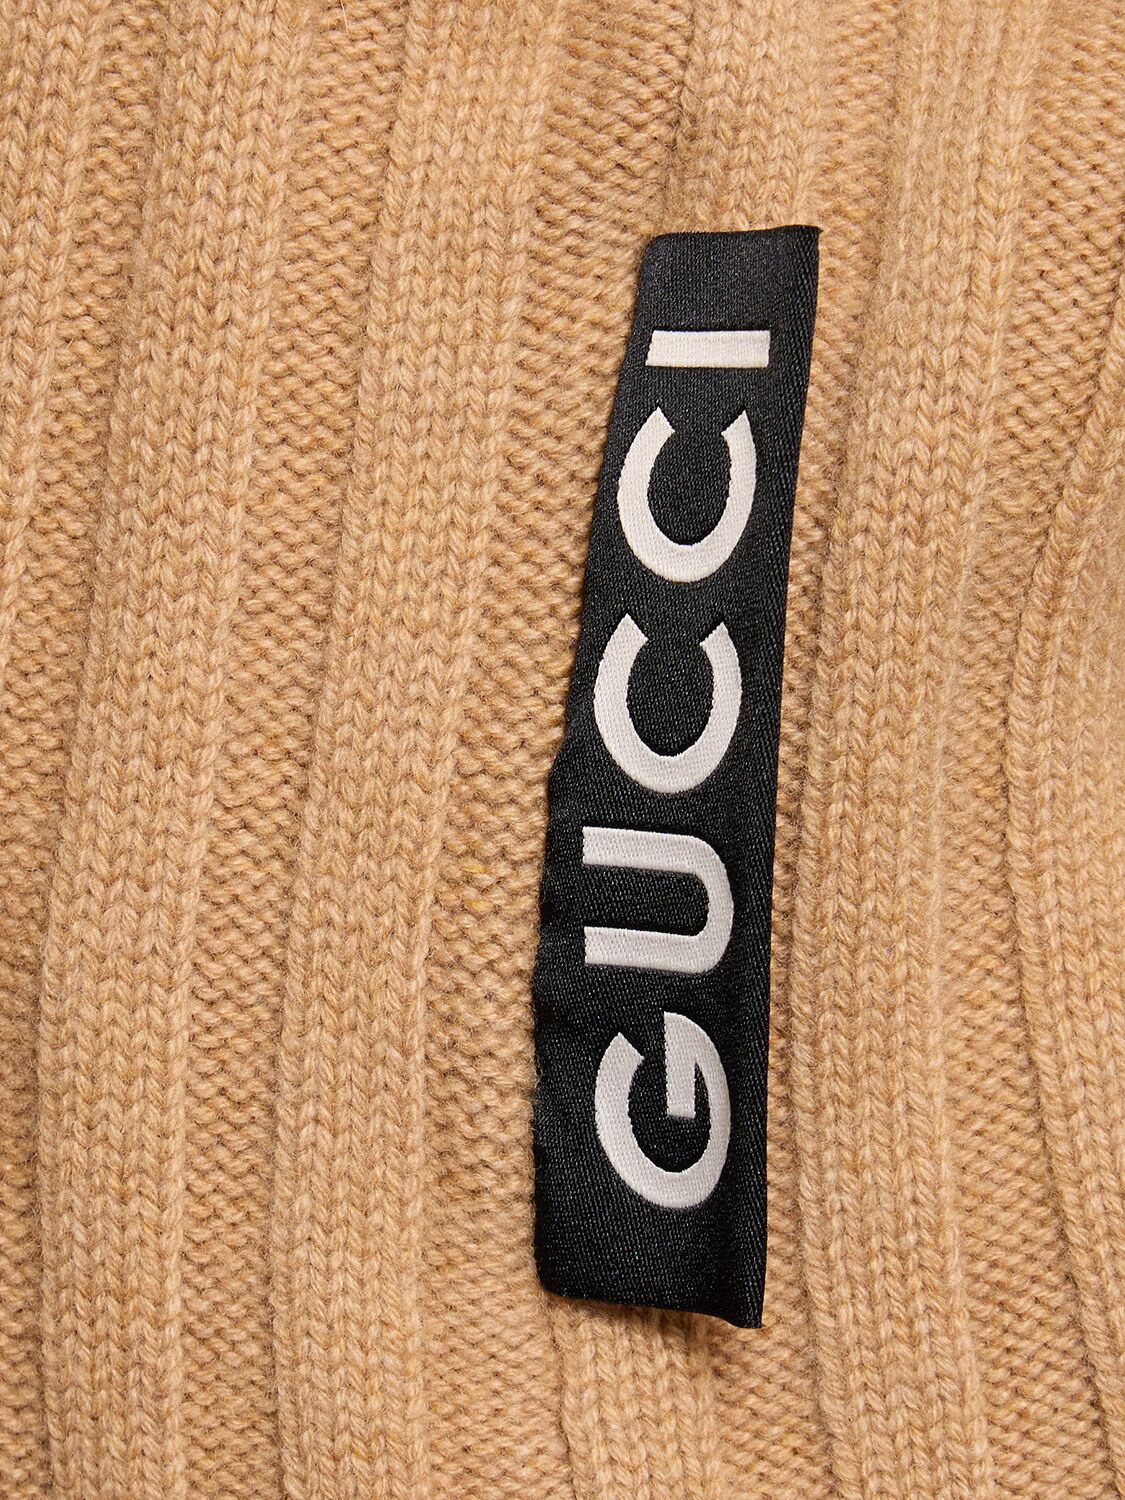 Shop Gucci Wool & Cashmere Turtleneck Sweater In Camel